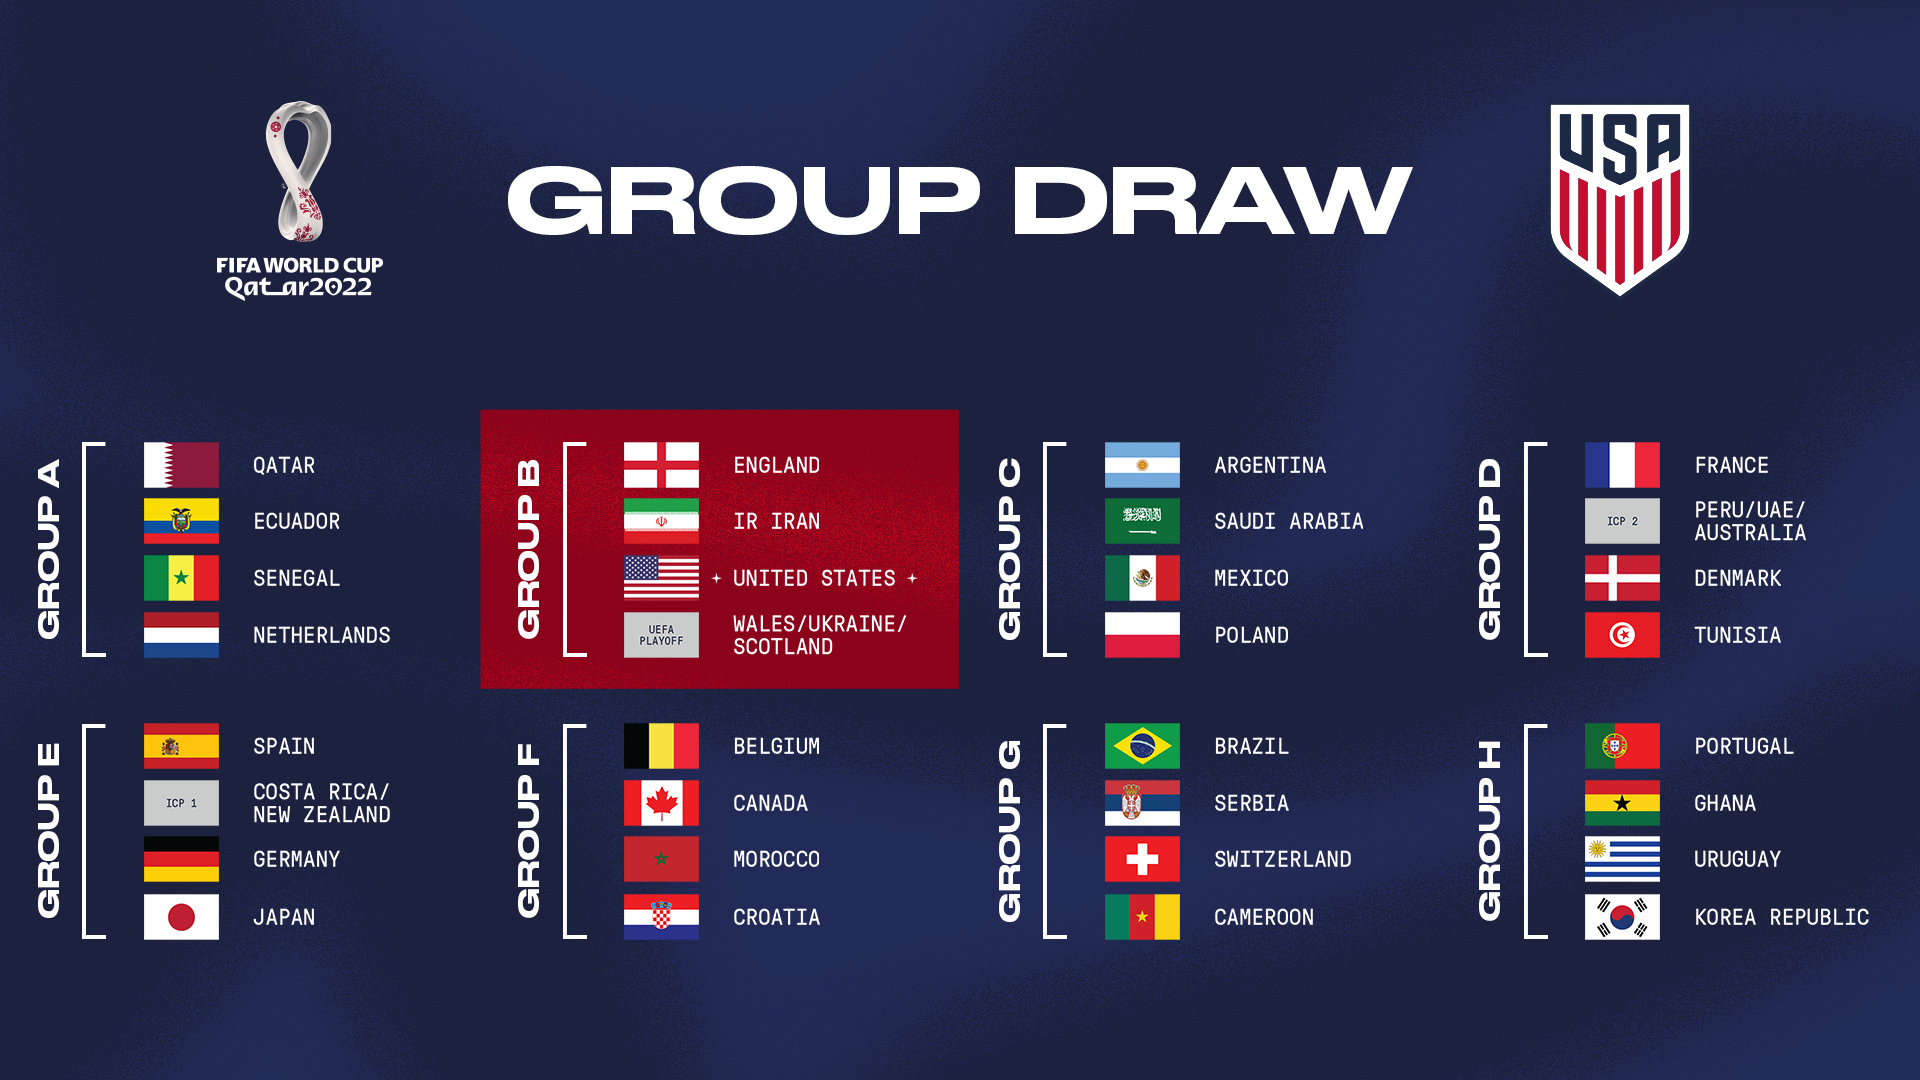 USMNT Draws England, Iran And Either Wales, Scotland Or Ukraine In Group B At The 2022 FIFA World Cup In Qatar